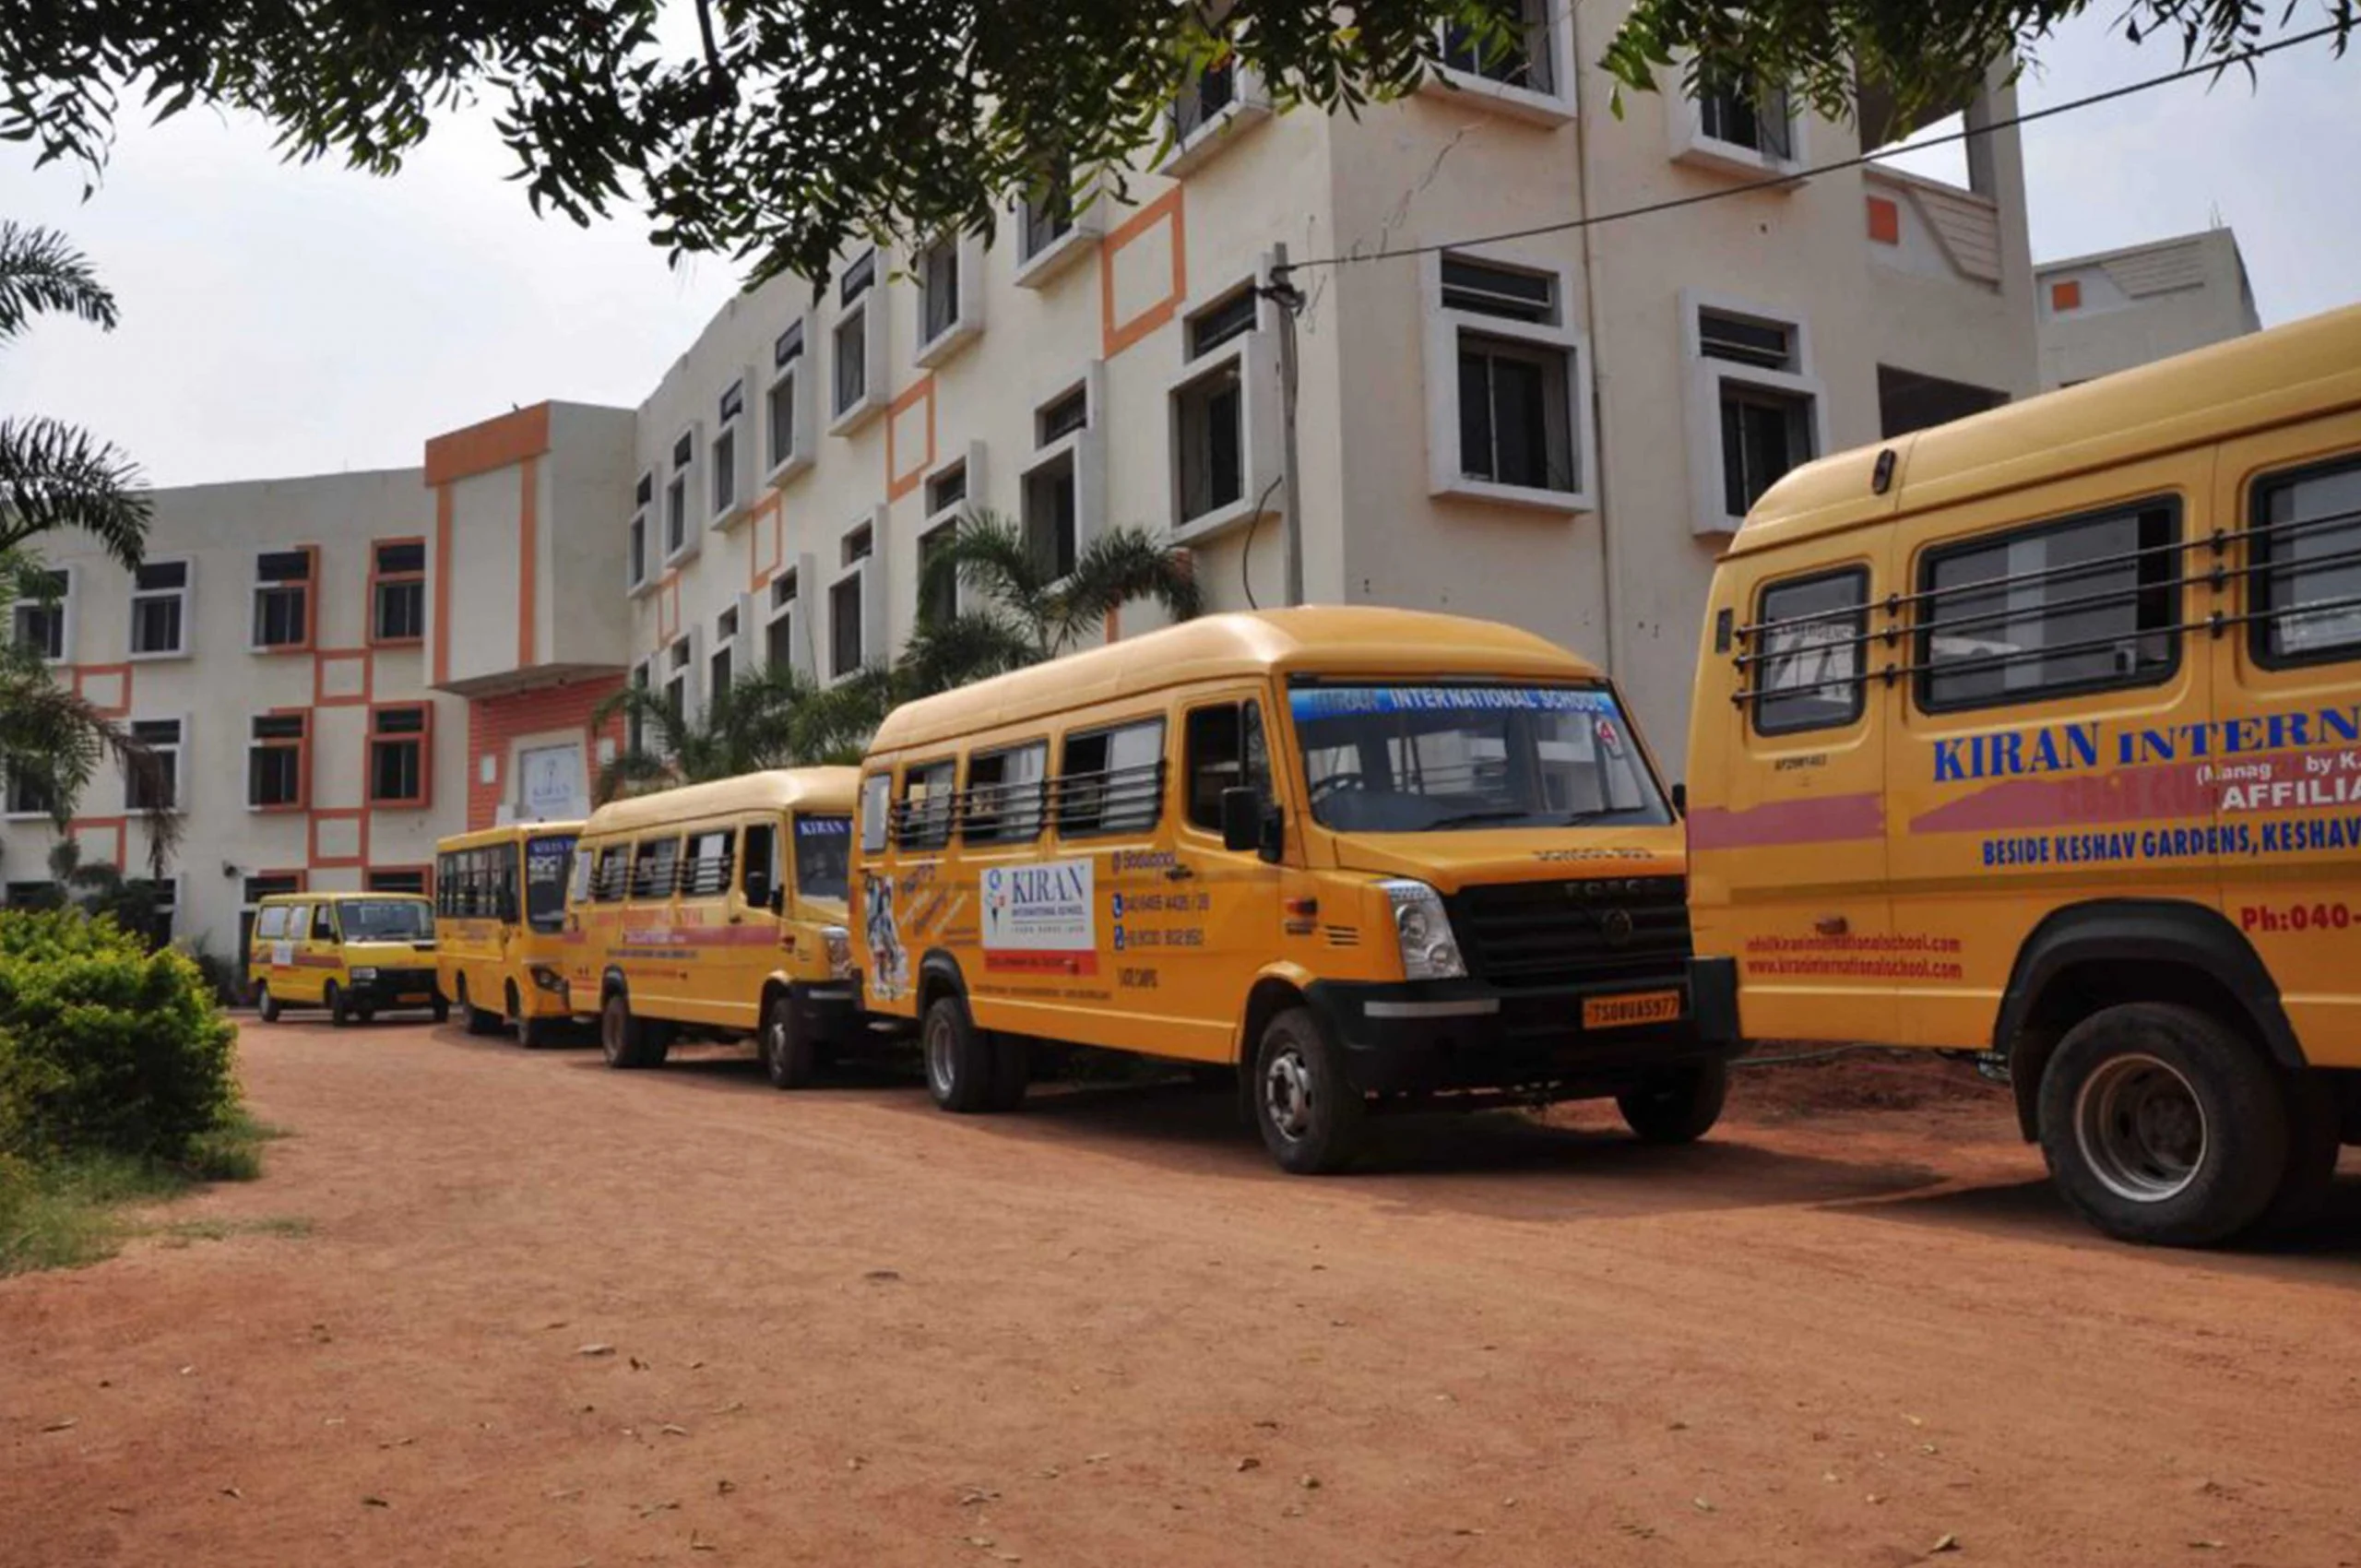 School buses are parked in school